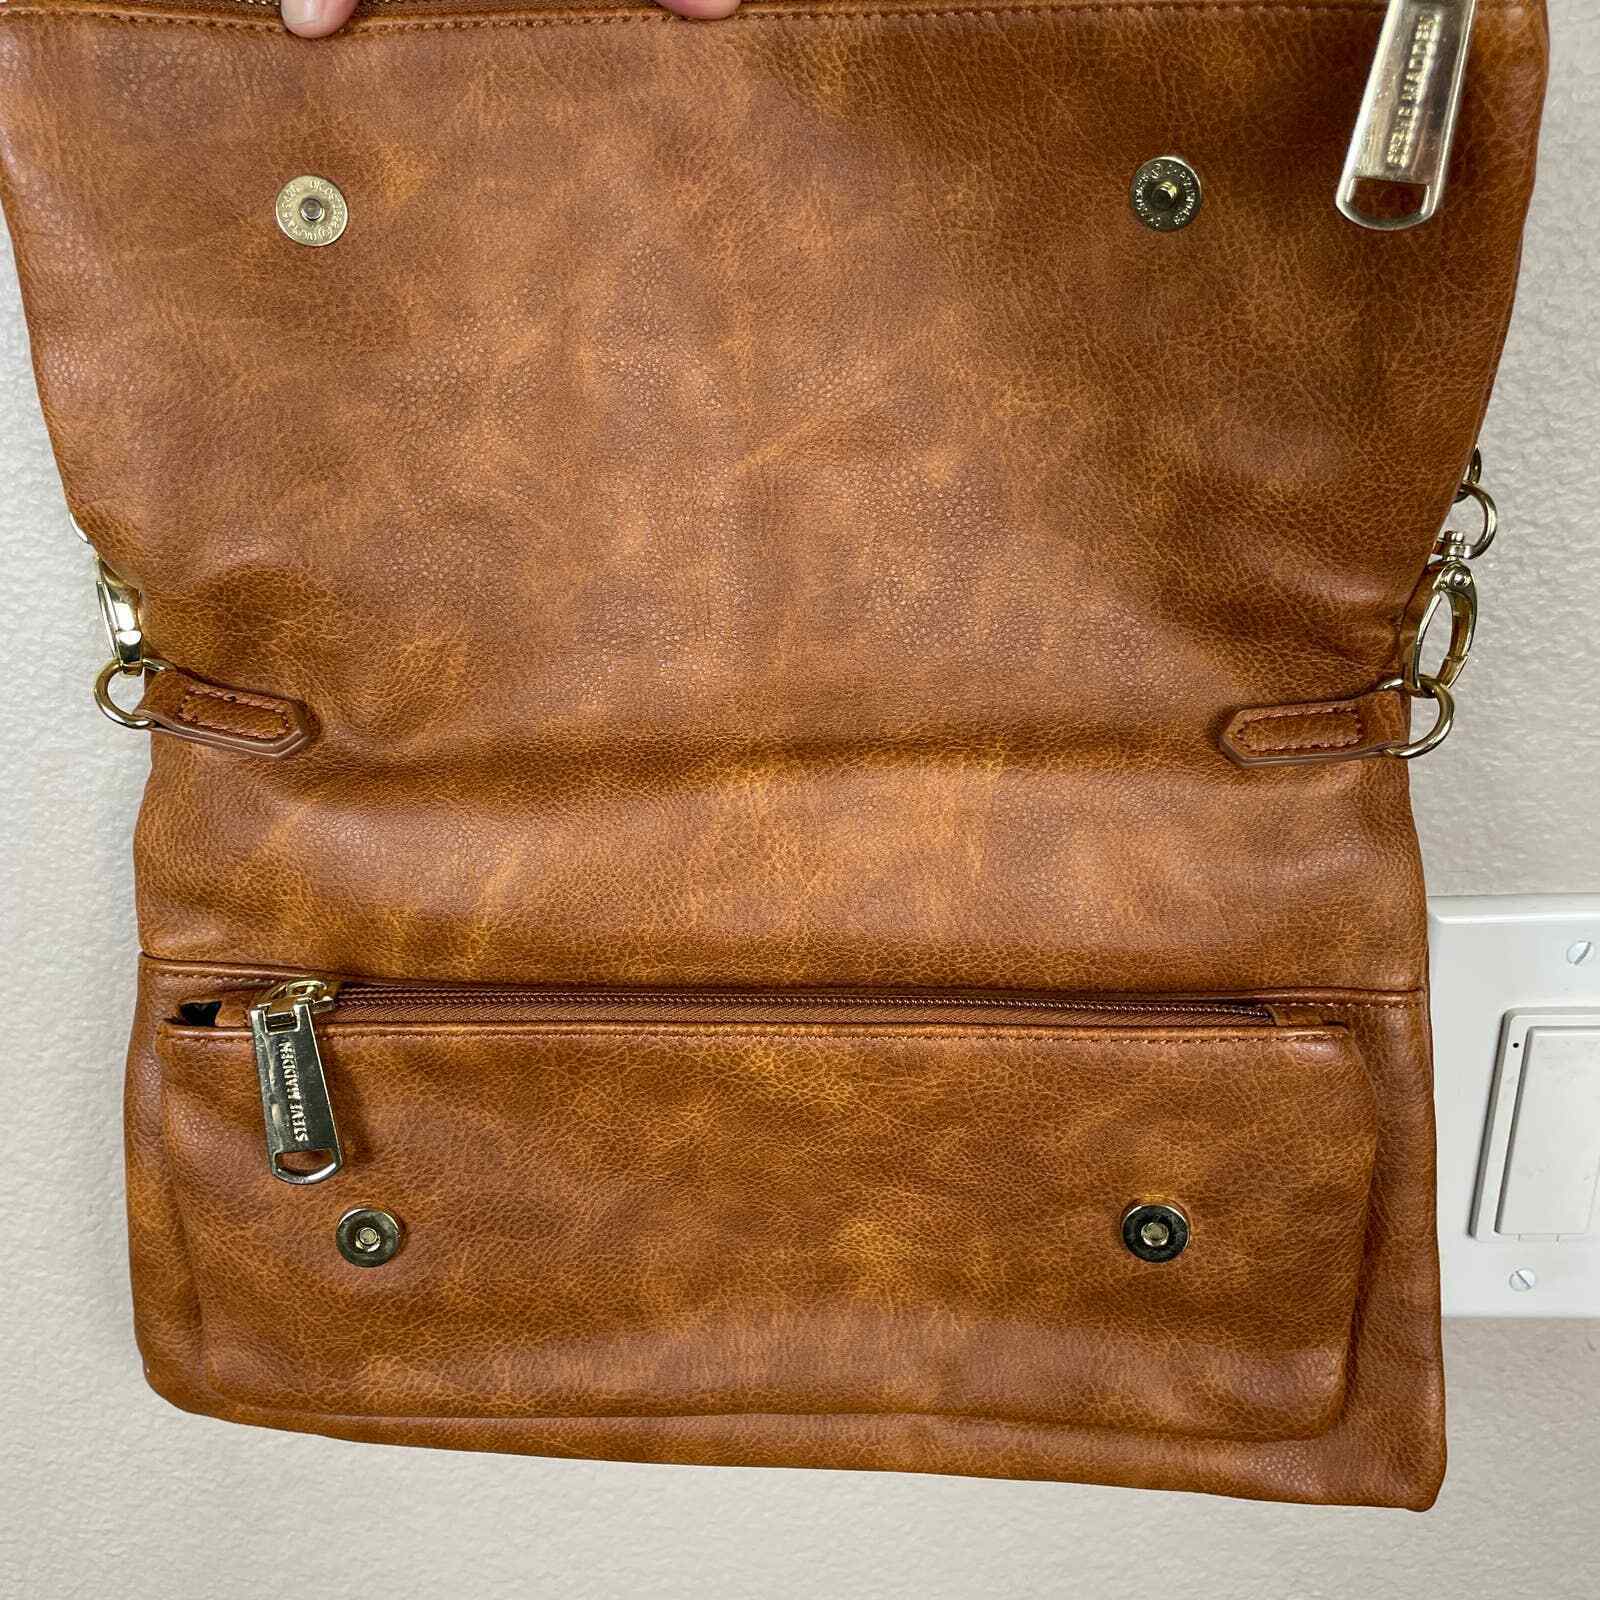 Steve Madden Brown Faux Leather Crossbody Bag - image 8